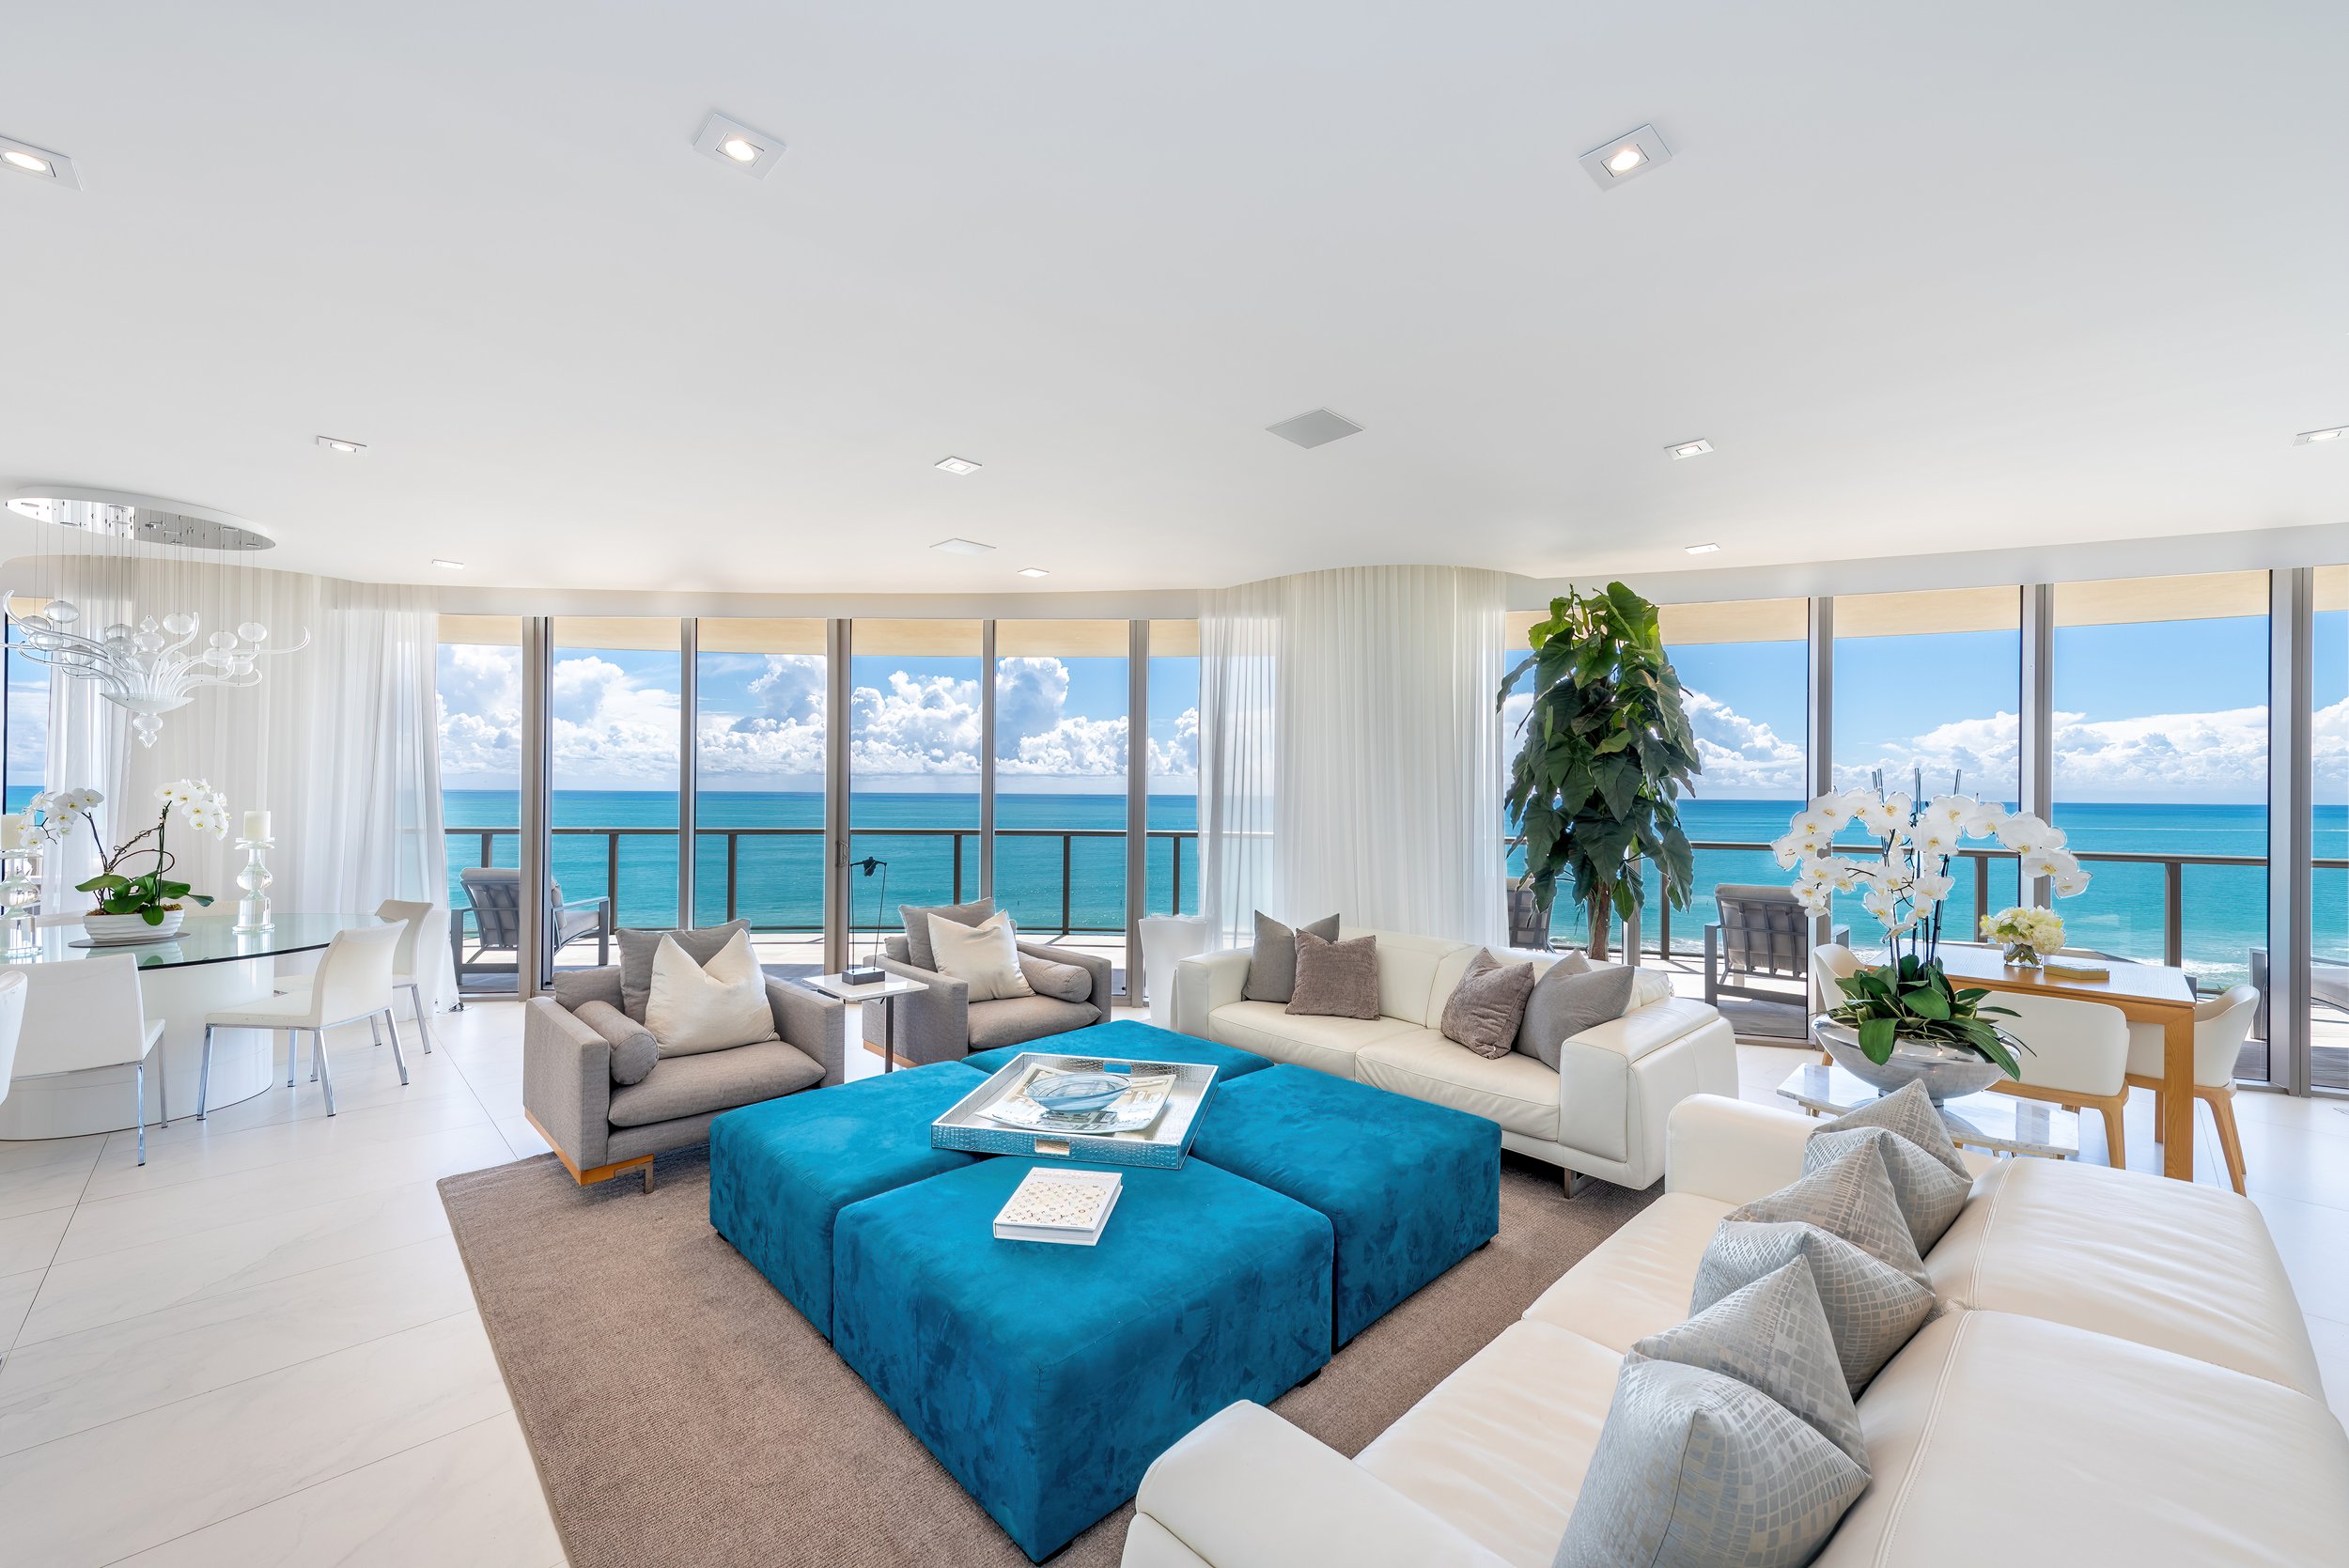 Master Brokers Forum Listing: See The Views From This Beachfront Condo In St. Regis Bal Harbour Asking $10.995 Million 9.JPG